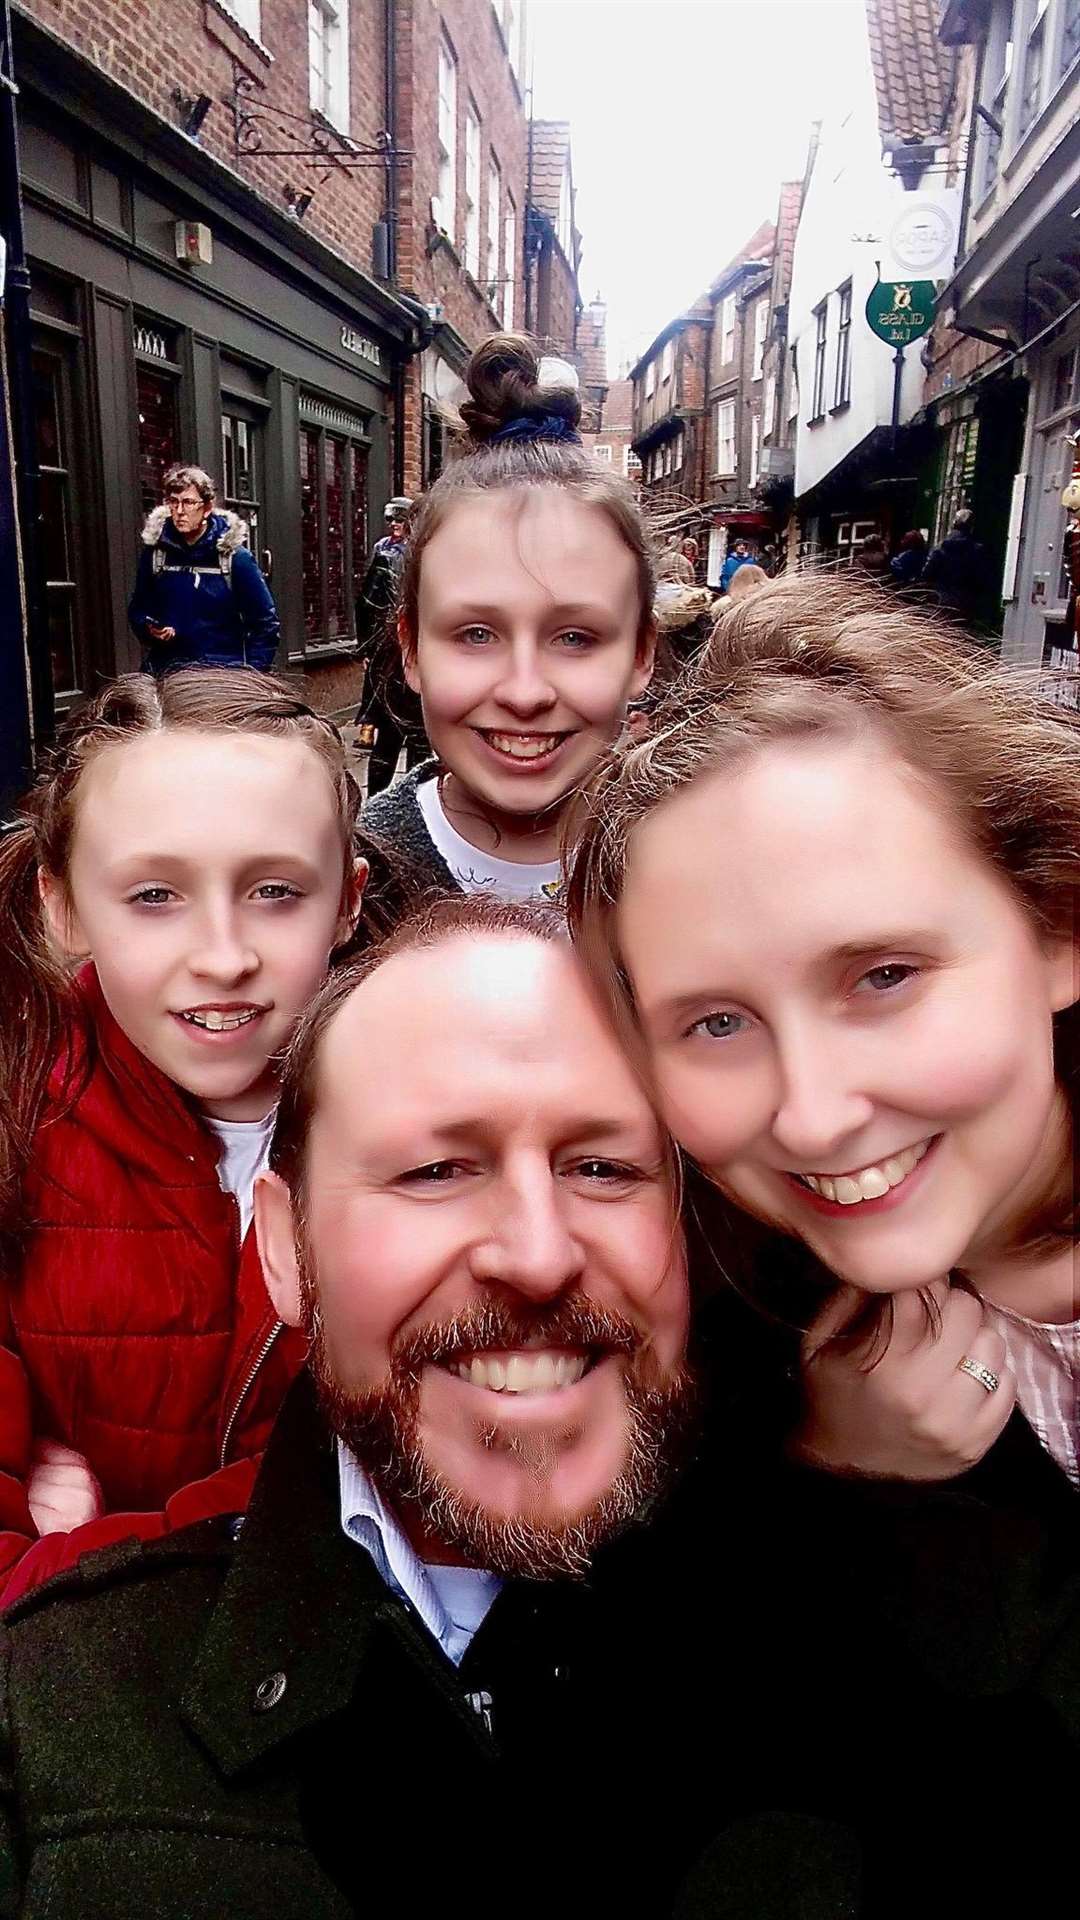 During a family outing to York earlier this year.